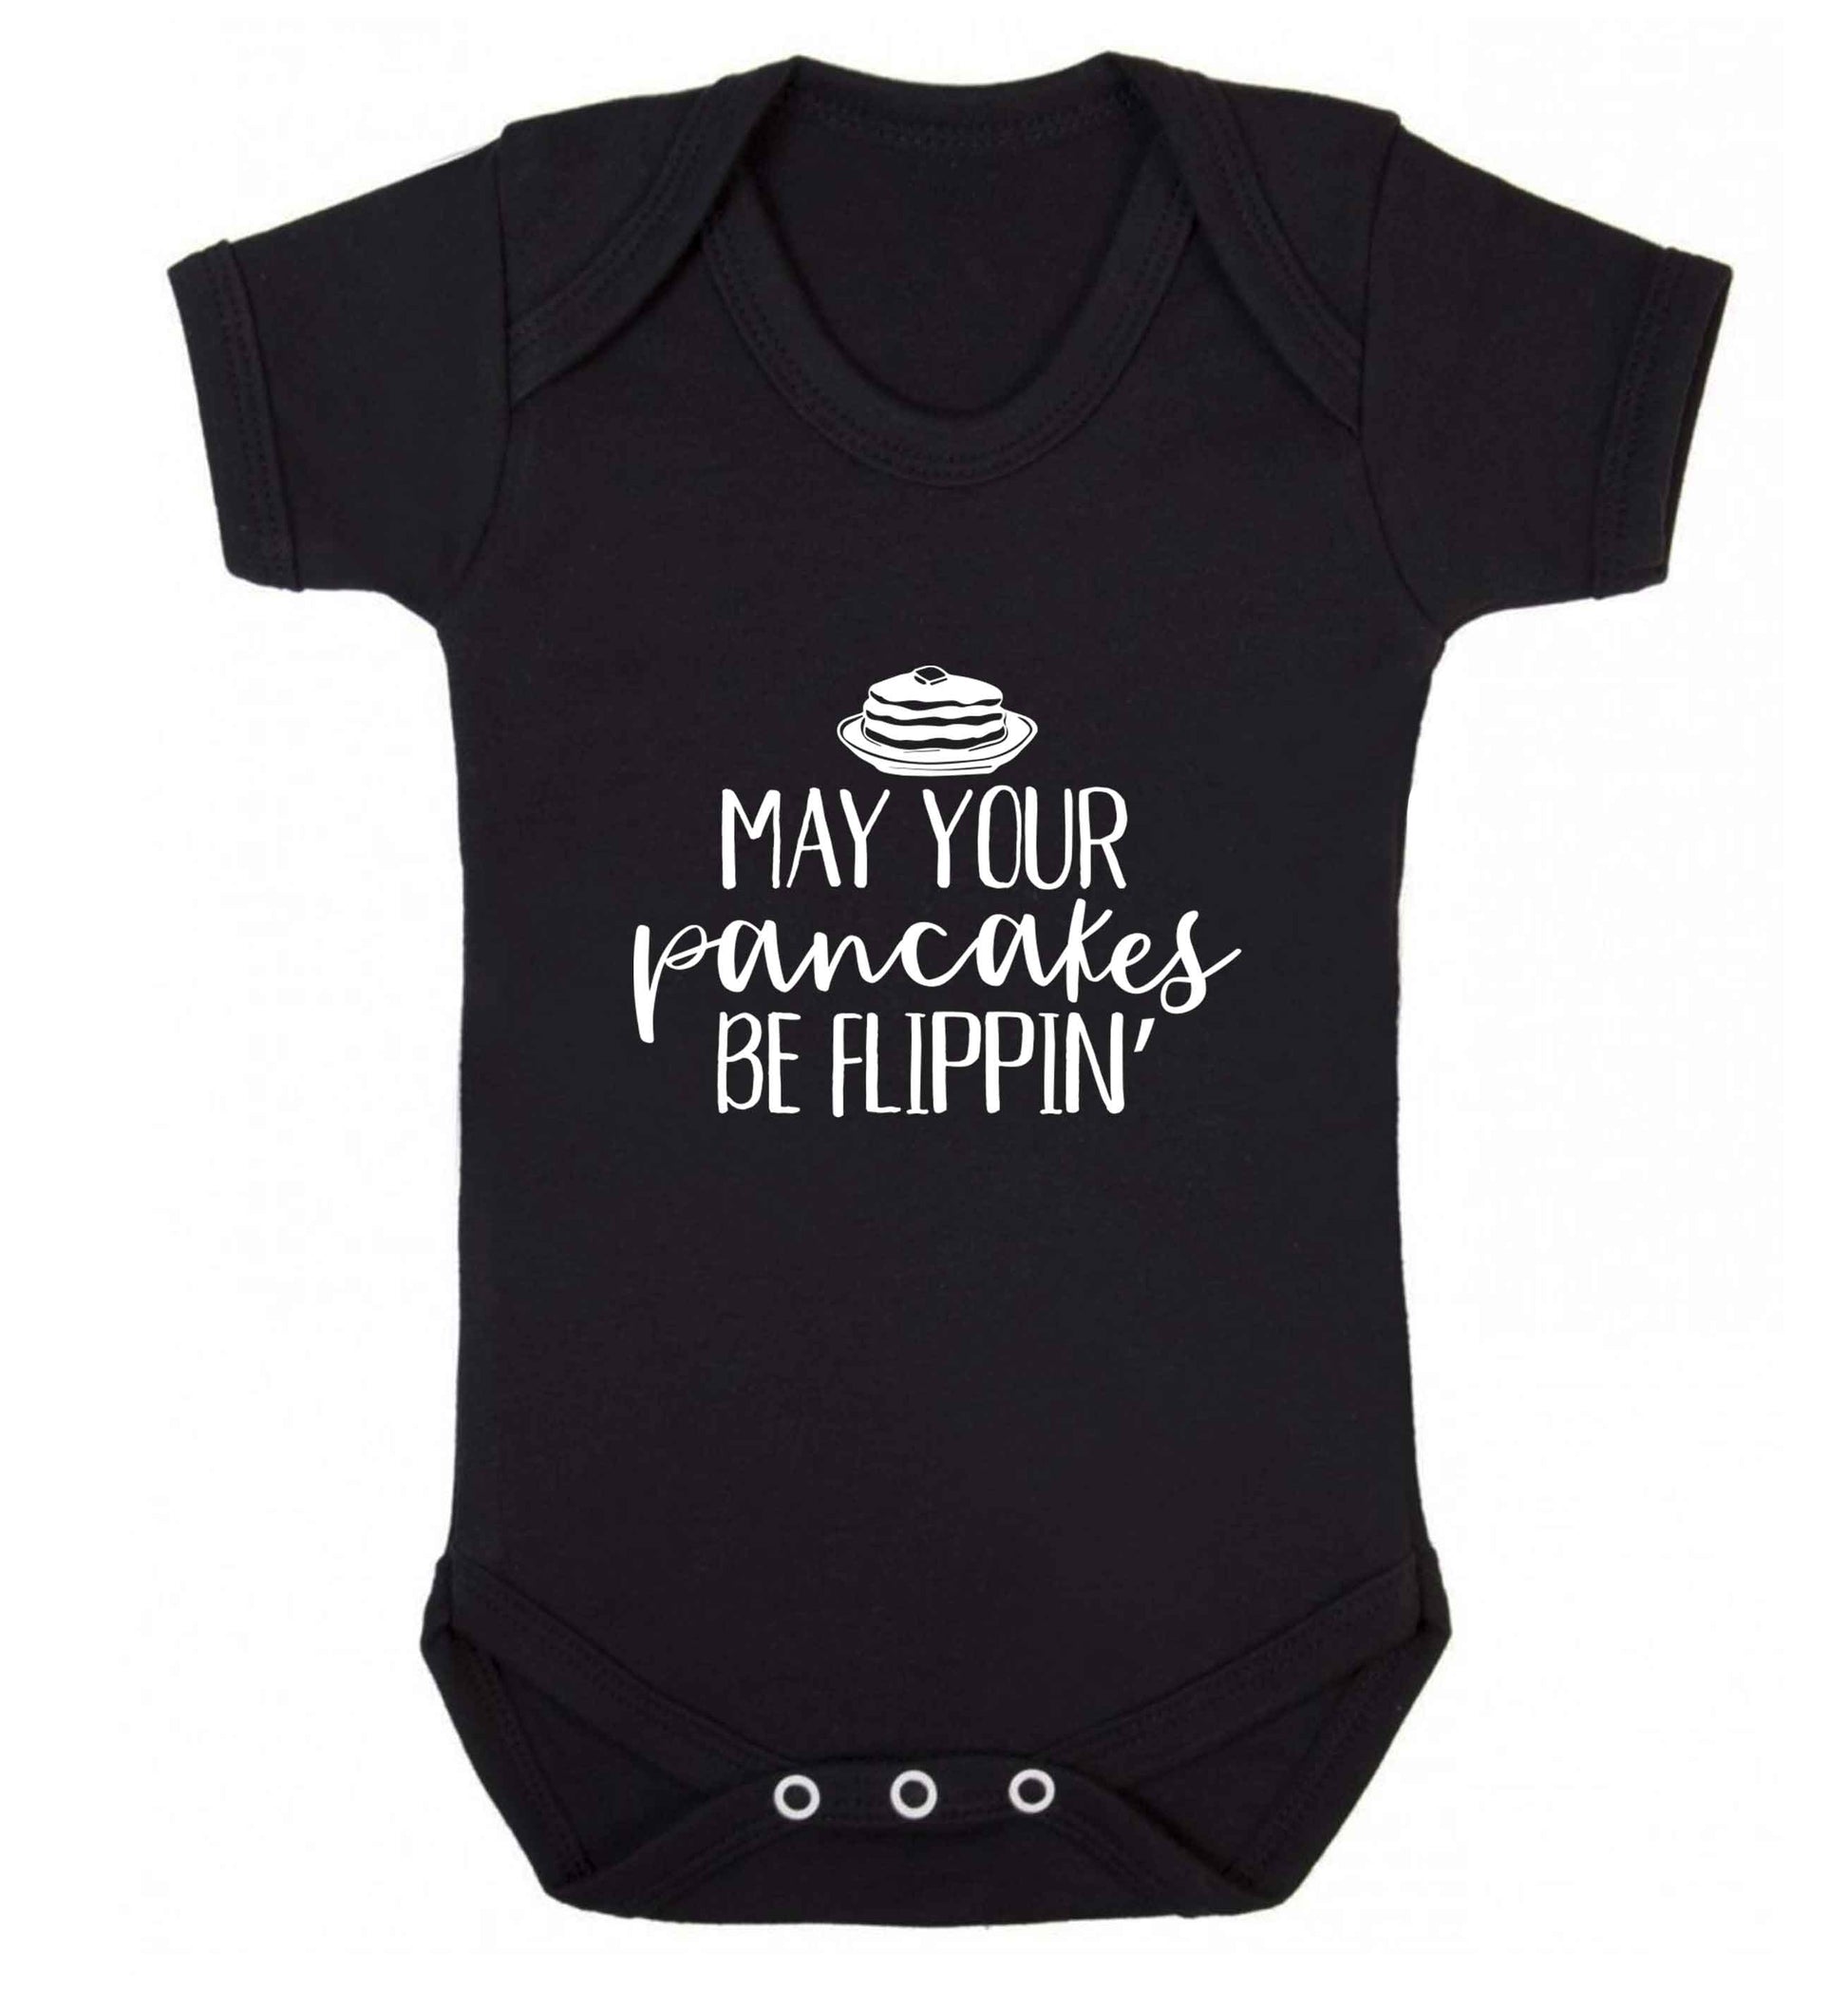 May your pancakes be flippin' baby vest black 18-24 months